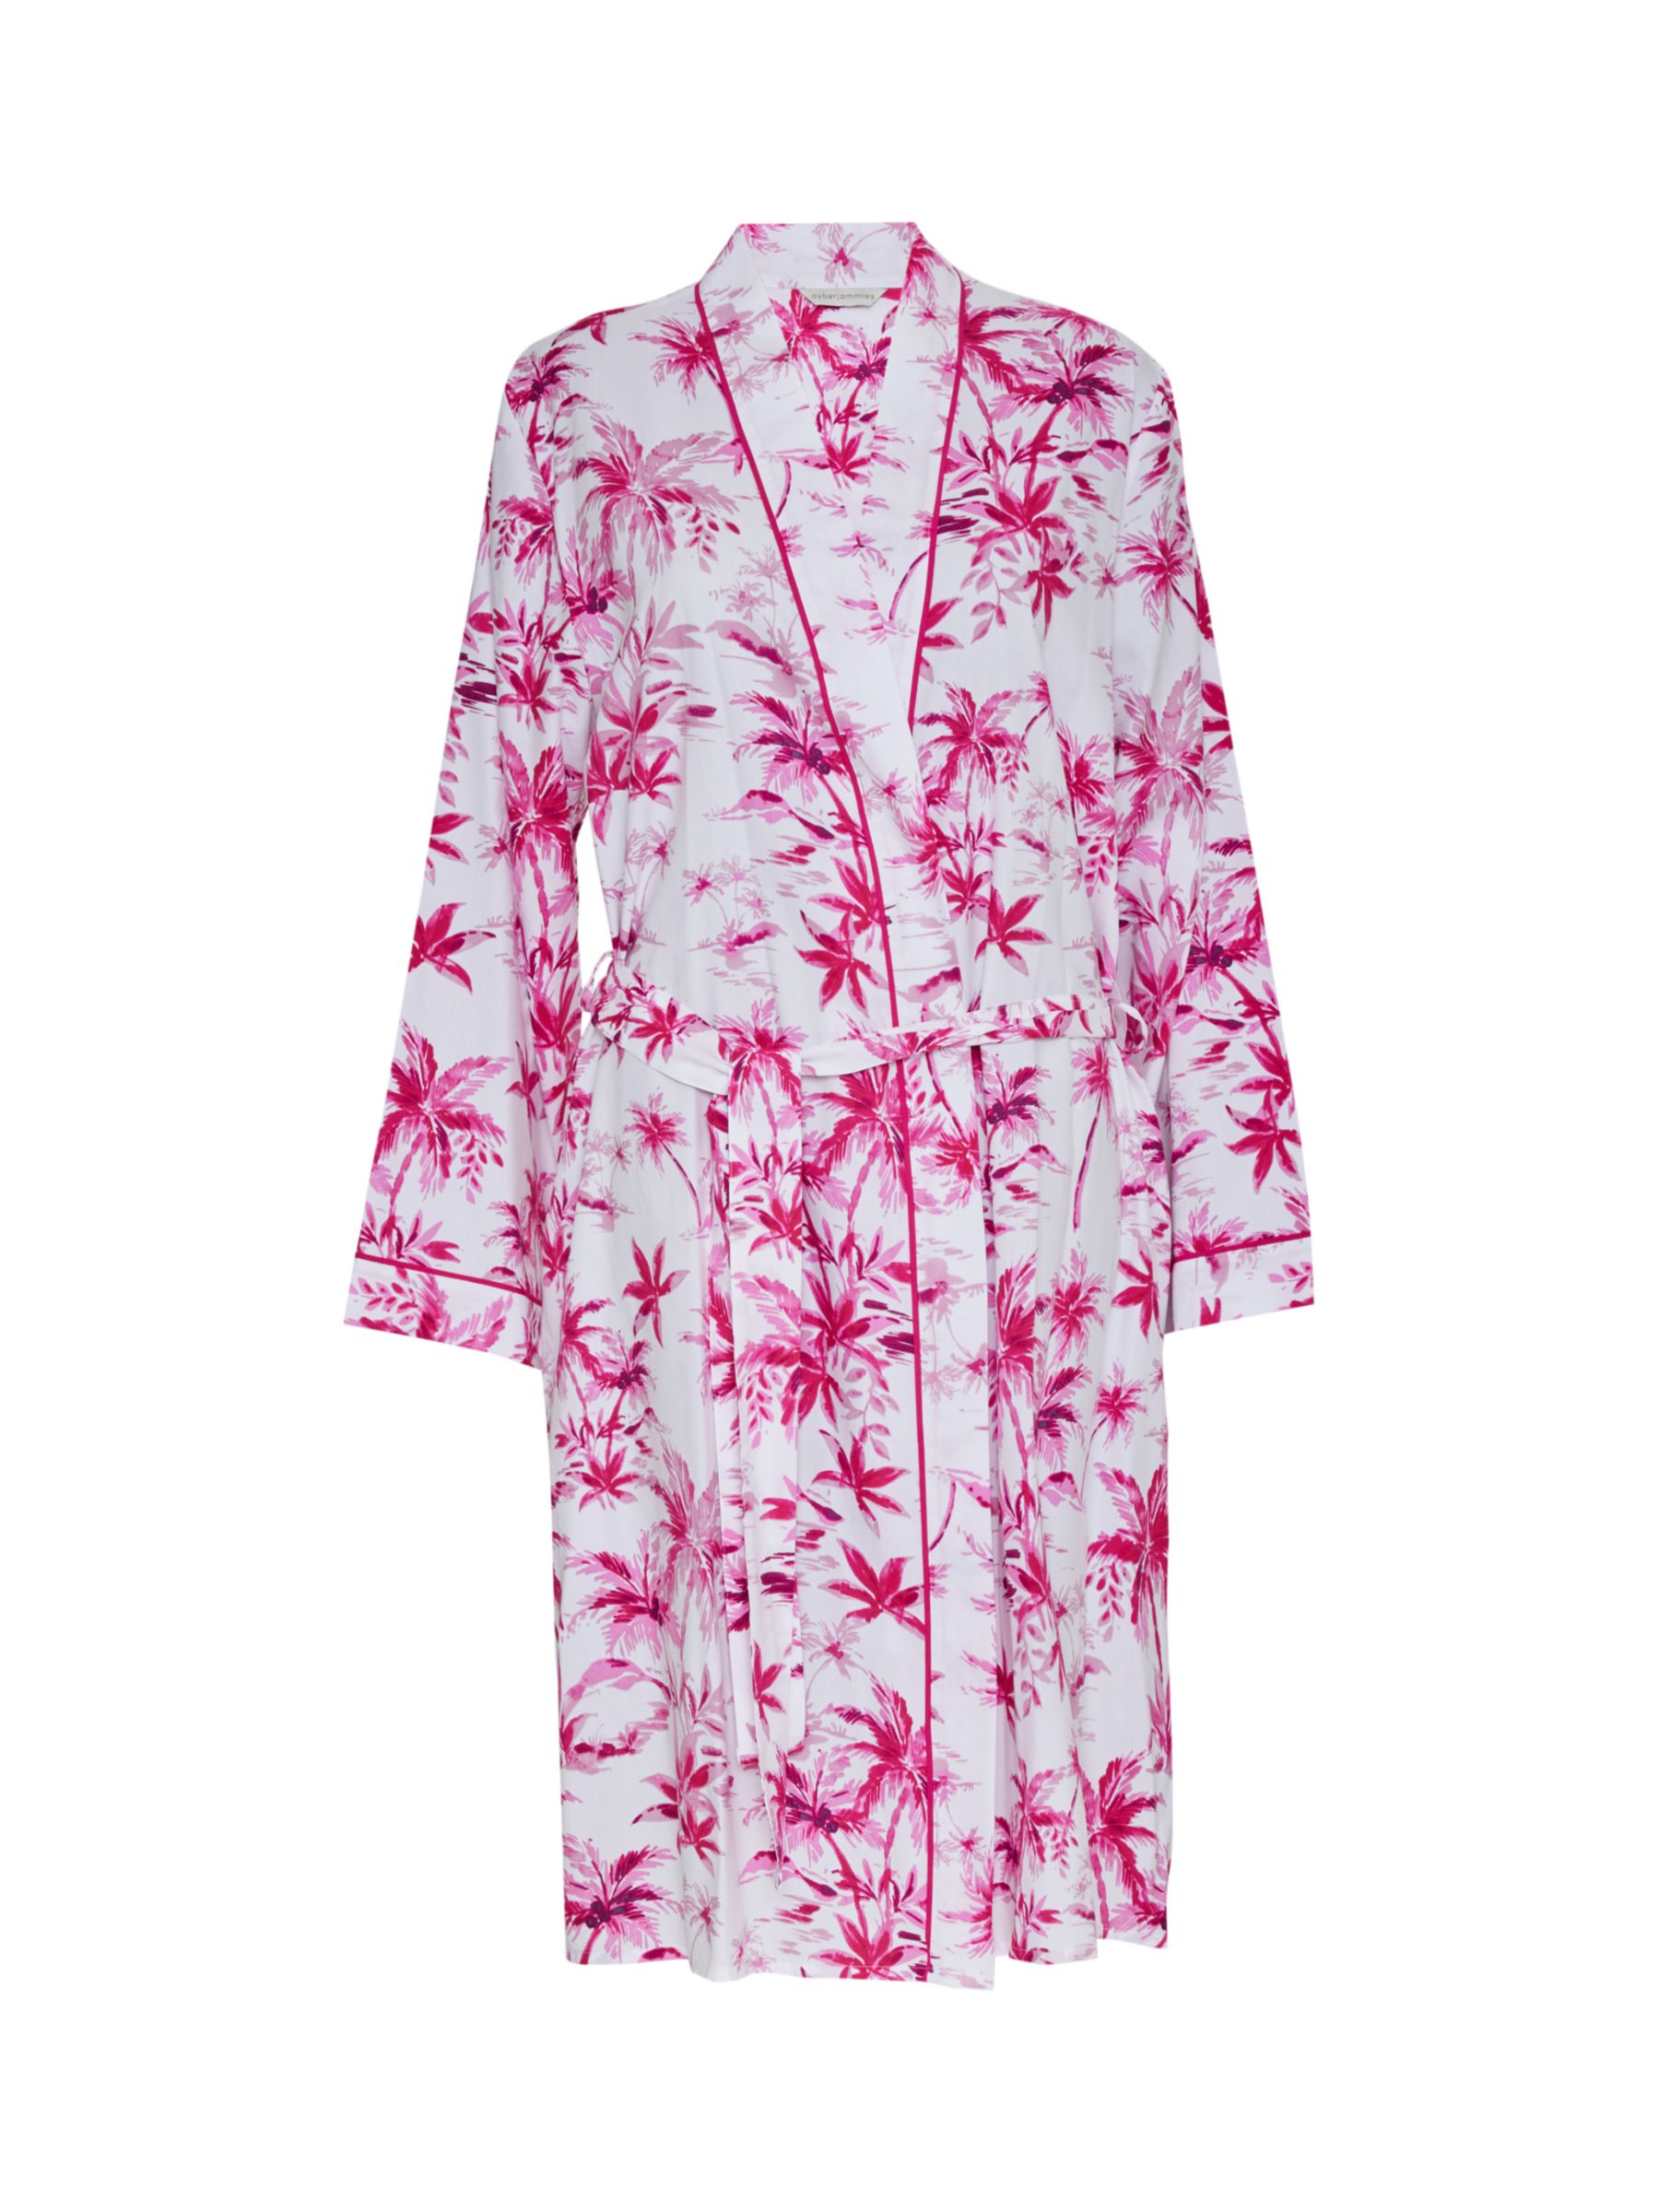 Cyberjammies Hailey Palm Dressing Gown, White/Multi at John Lewis ...